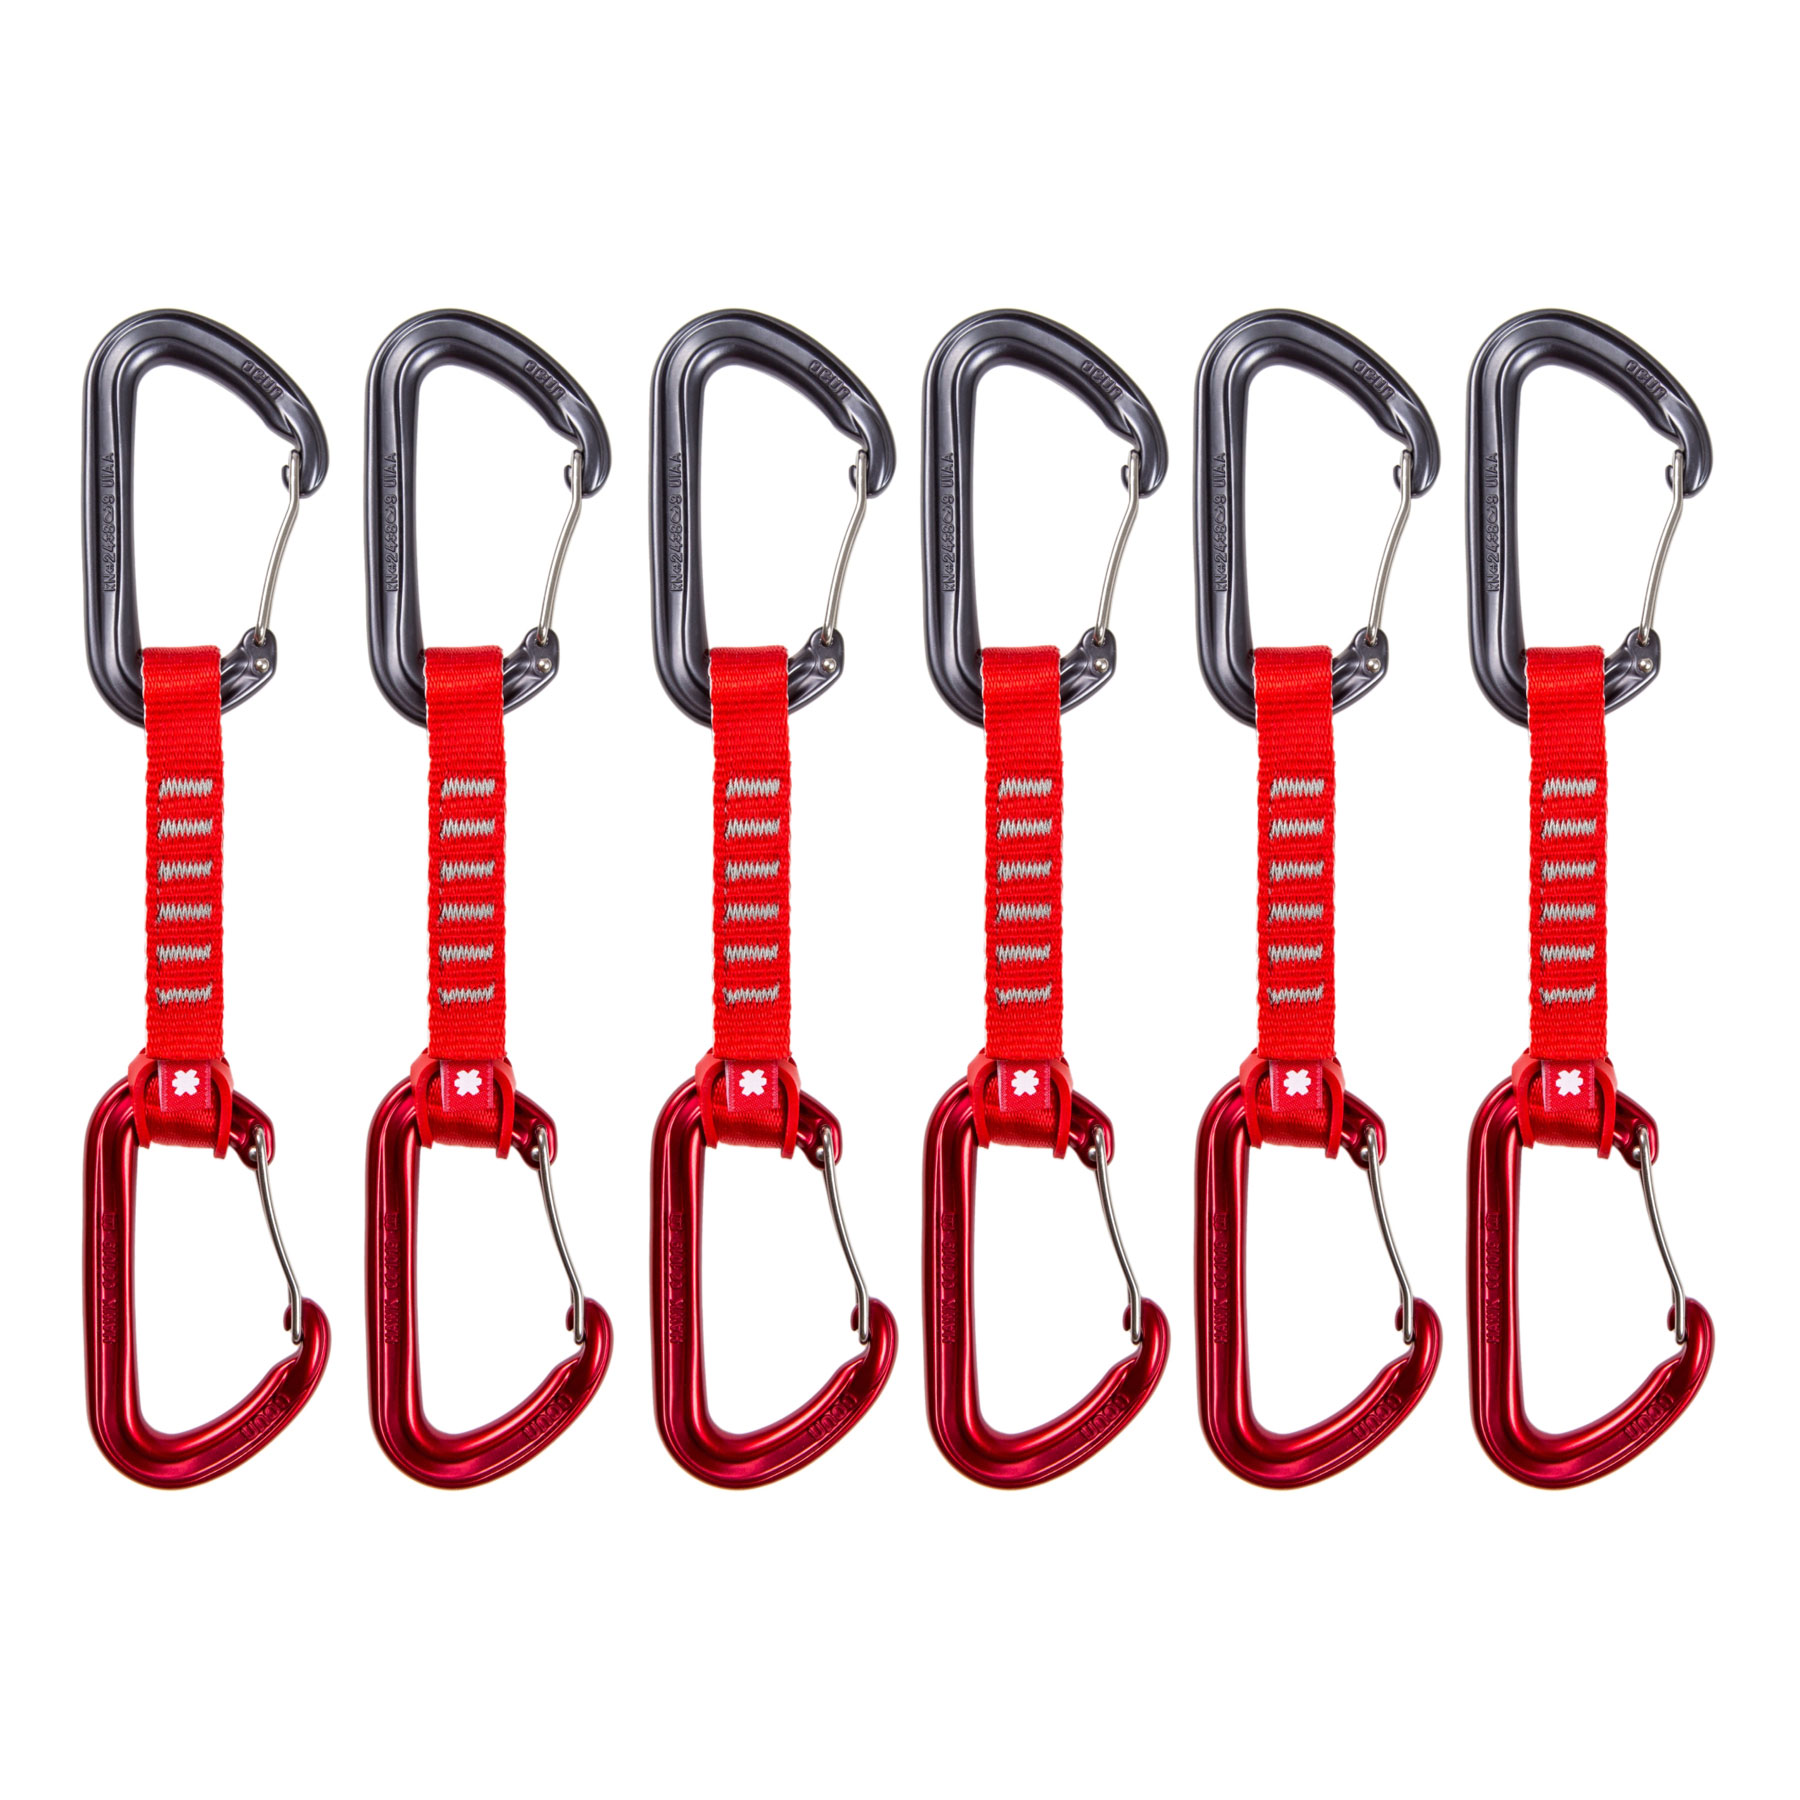 Picture of Ocún Hawk QD Wire Eco-Pes 16 mm 10 cm Quickdraw Set 6 Pack - red